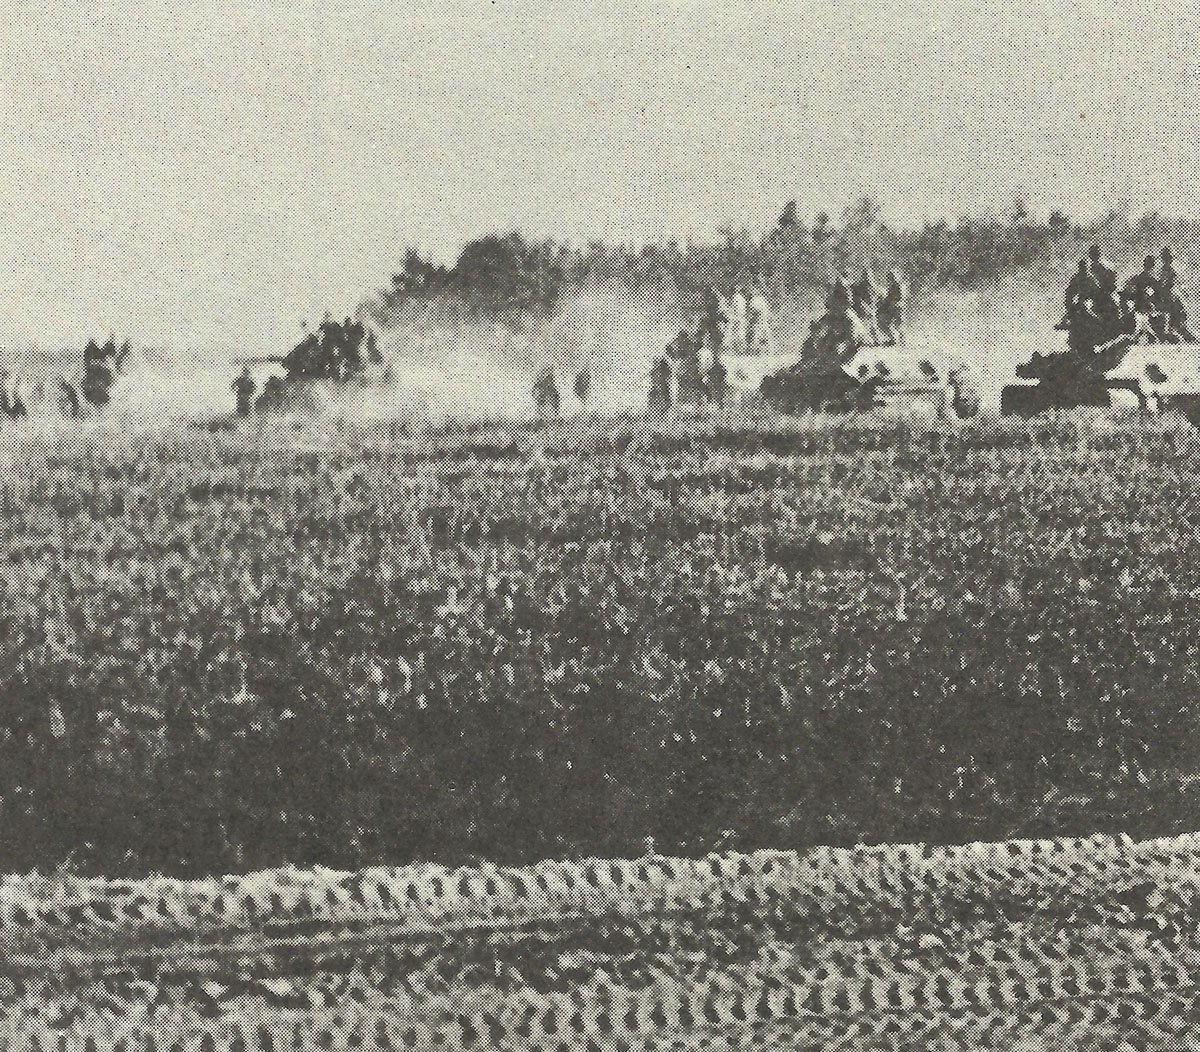 Soviet tanks at counter-offensive at Kursk